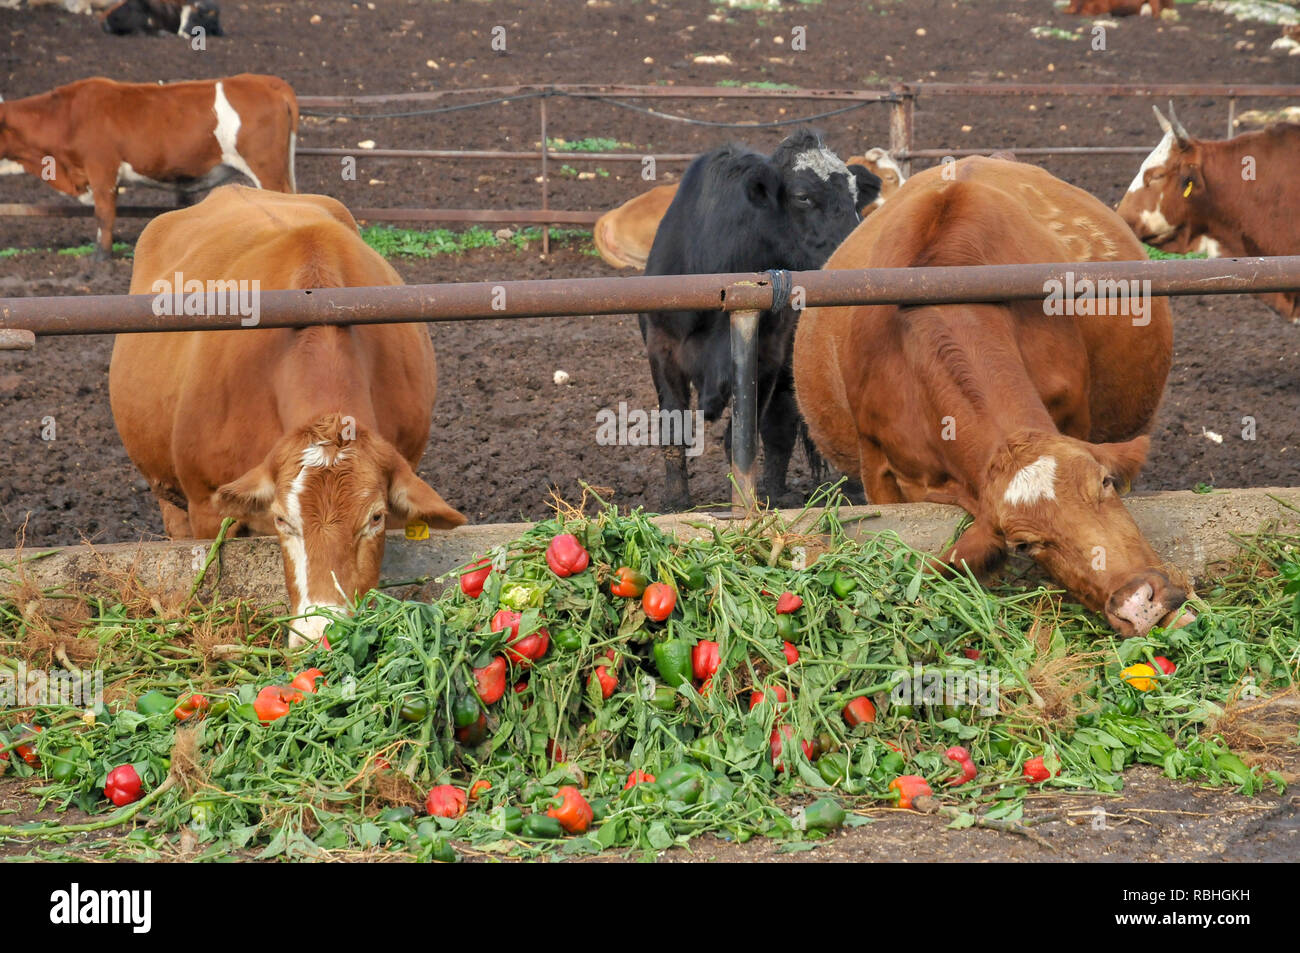 Dairy Farm. Cows are given surplus bell peppers to eat. Surplus vegetables are fed to livestock to prevent flooding the market with products and havin Stock Photo